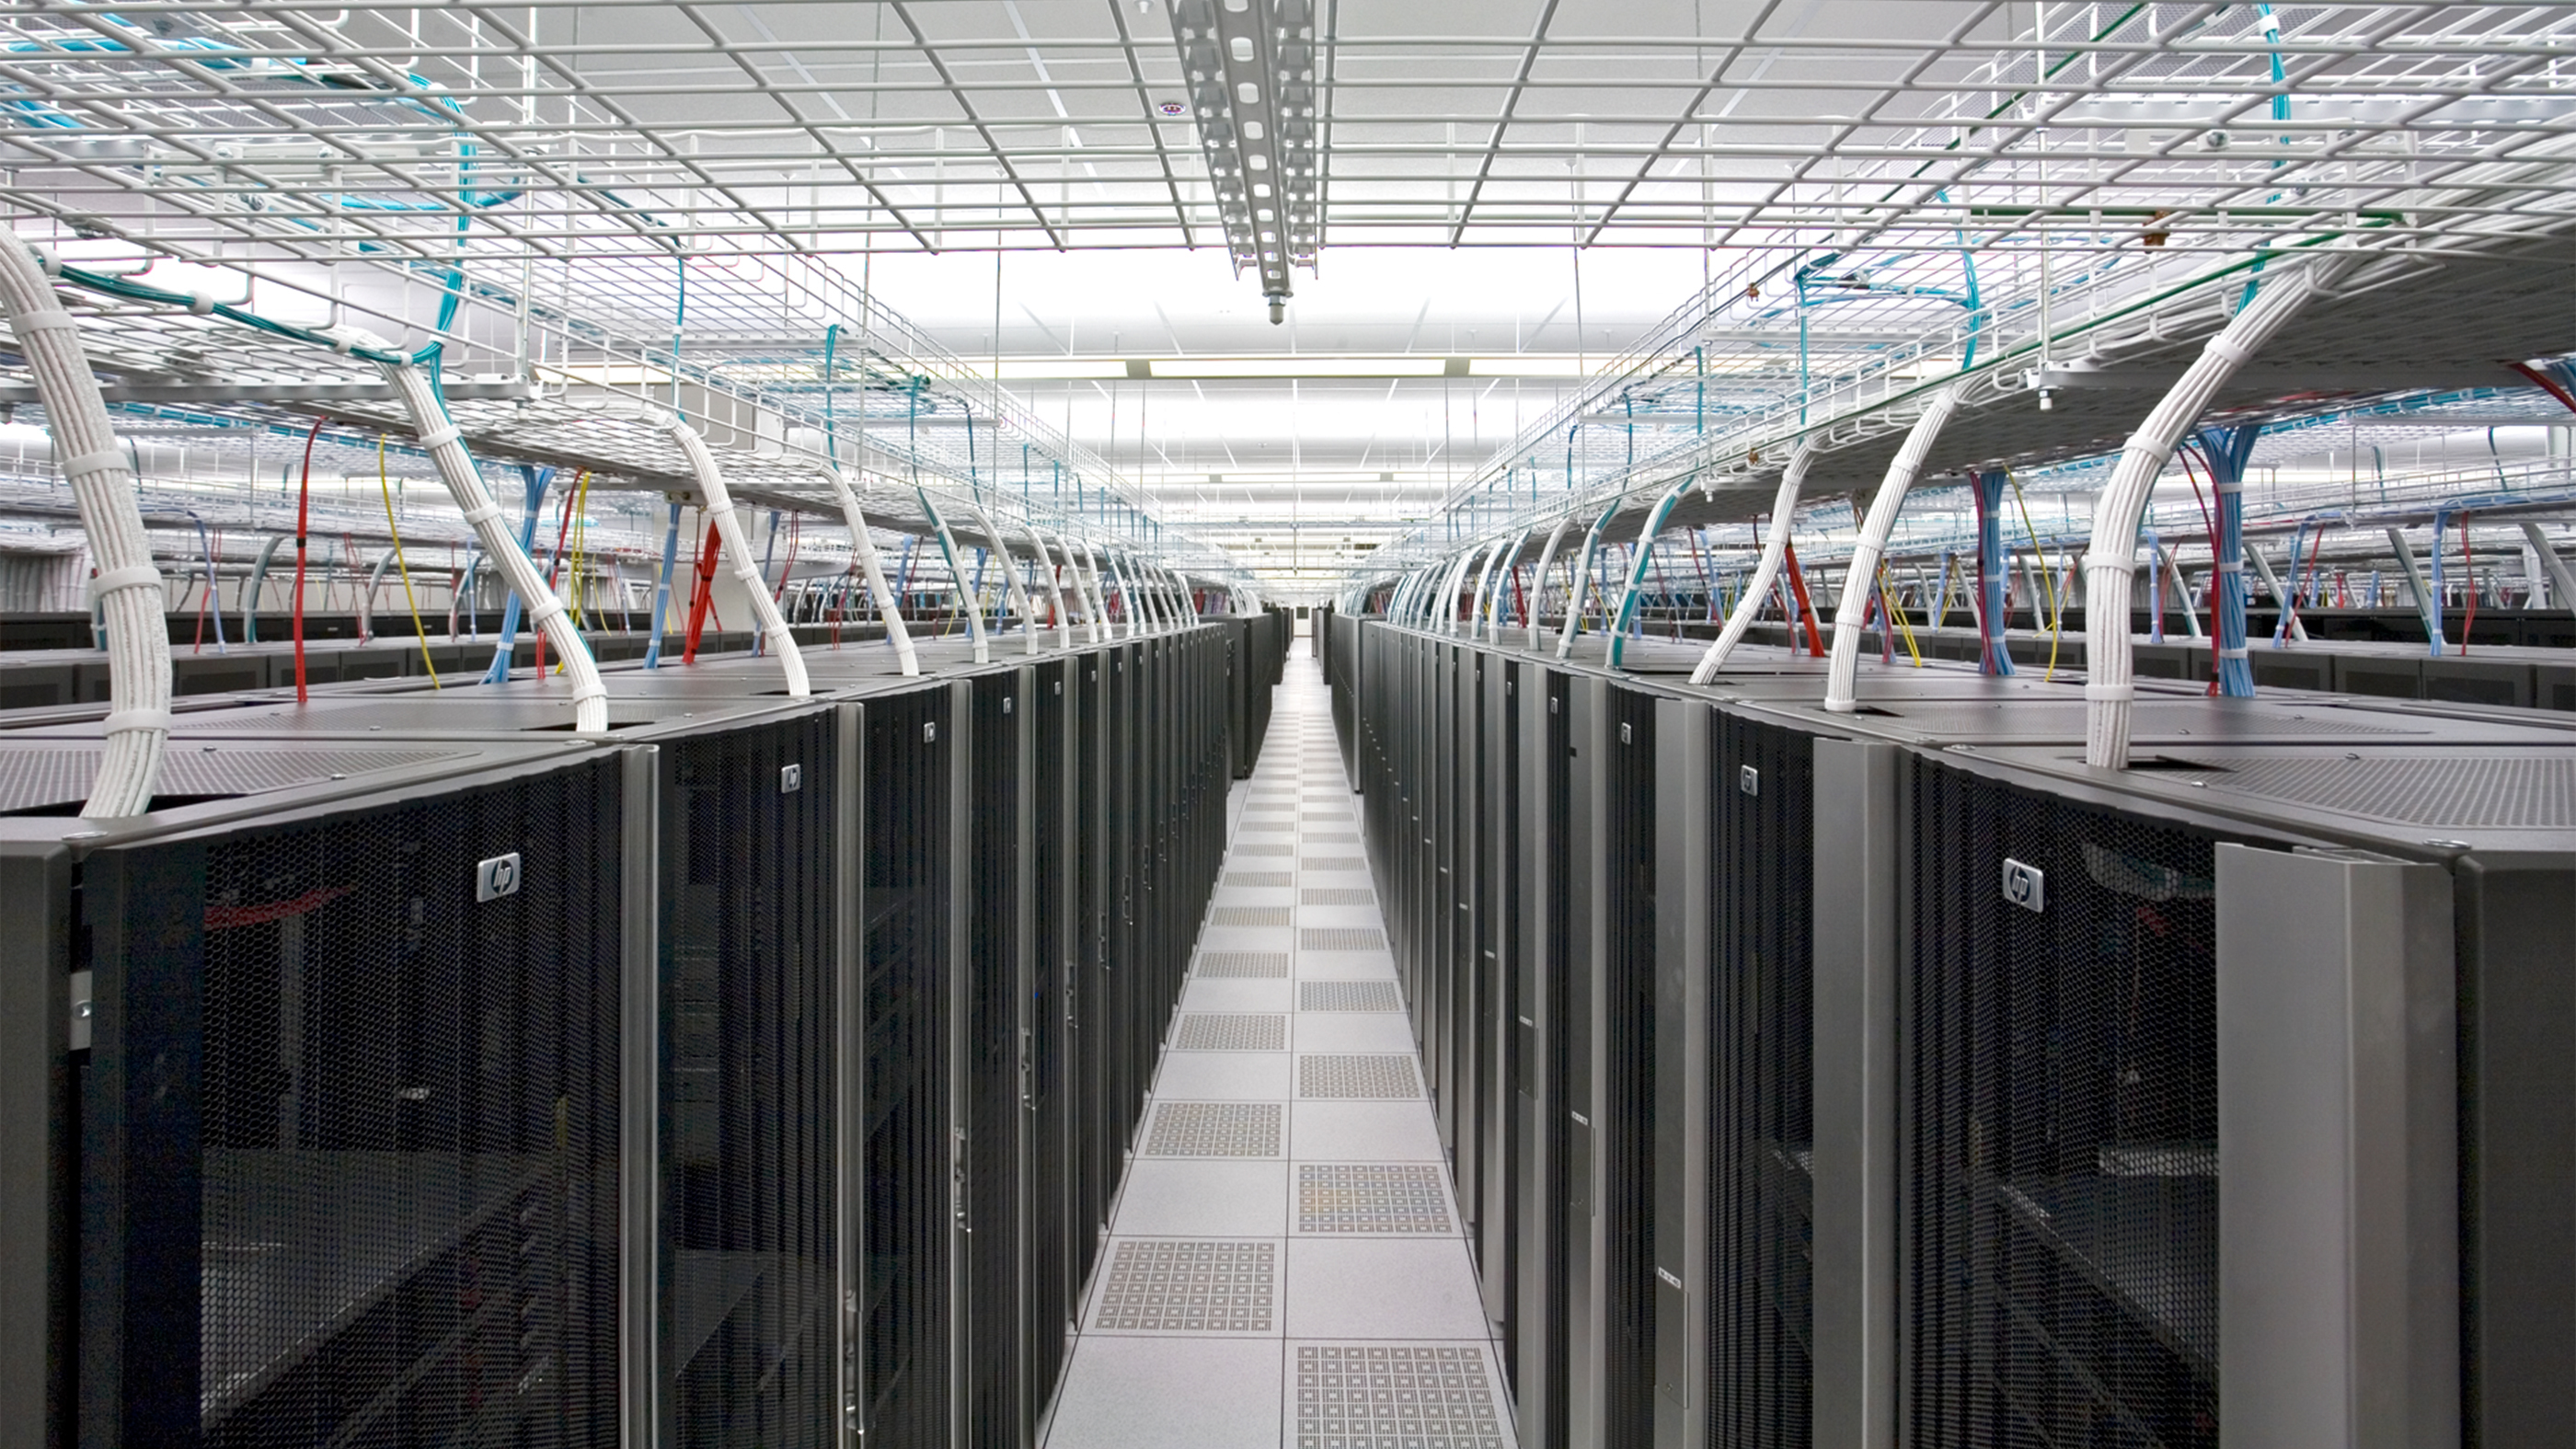 View down a server aisle with organized wiring above the rows.